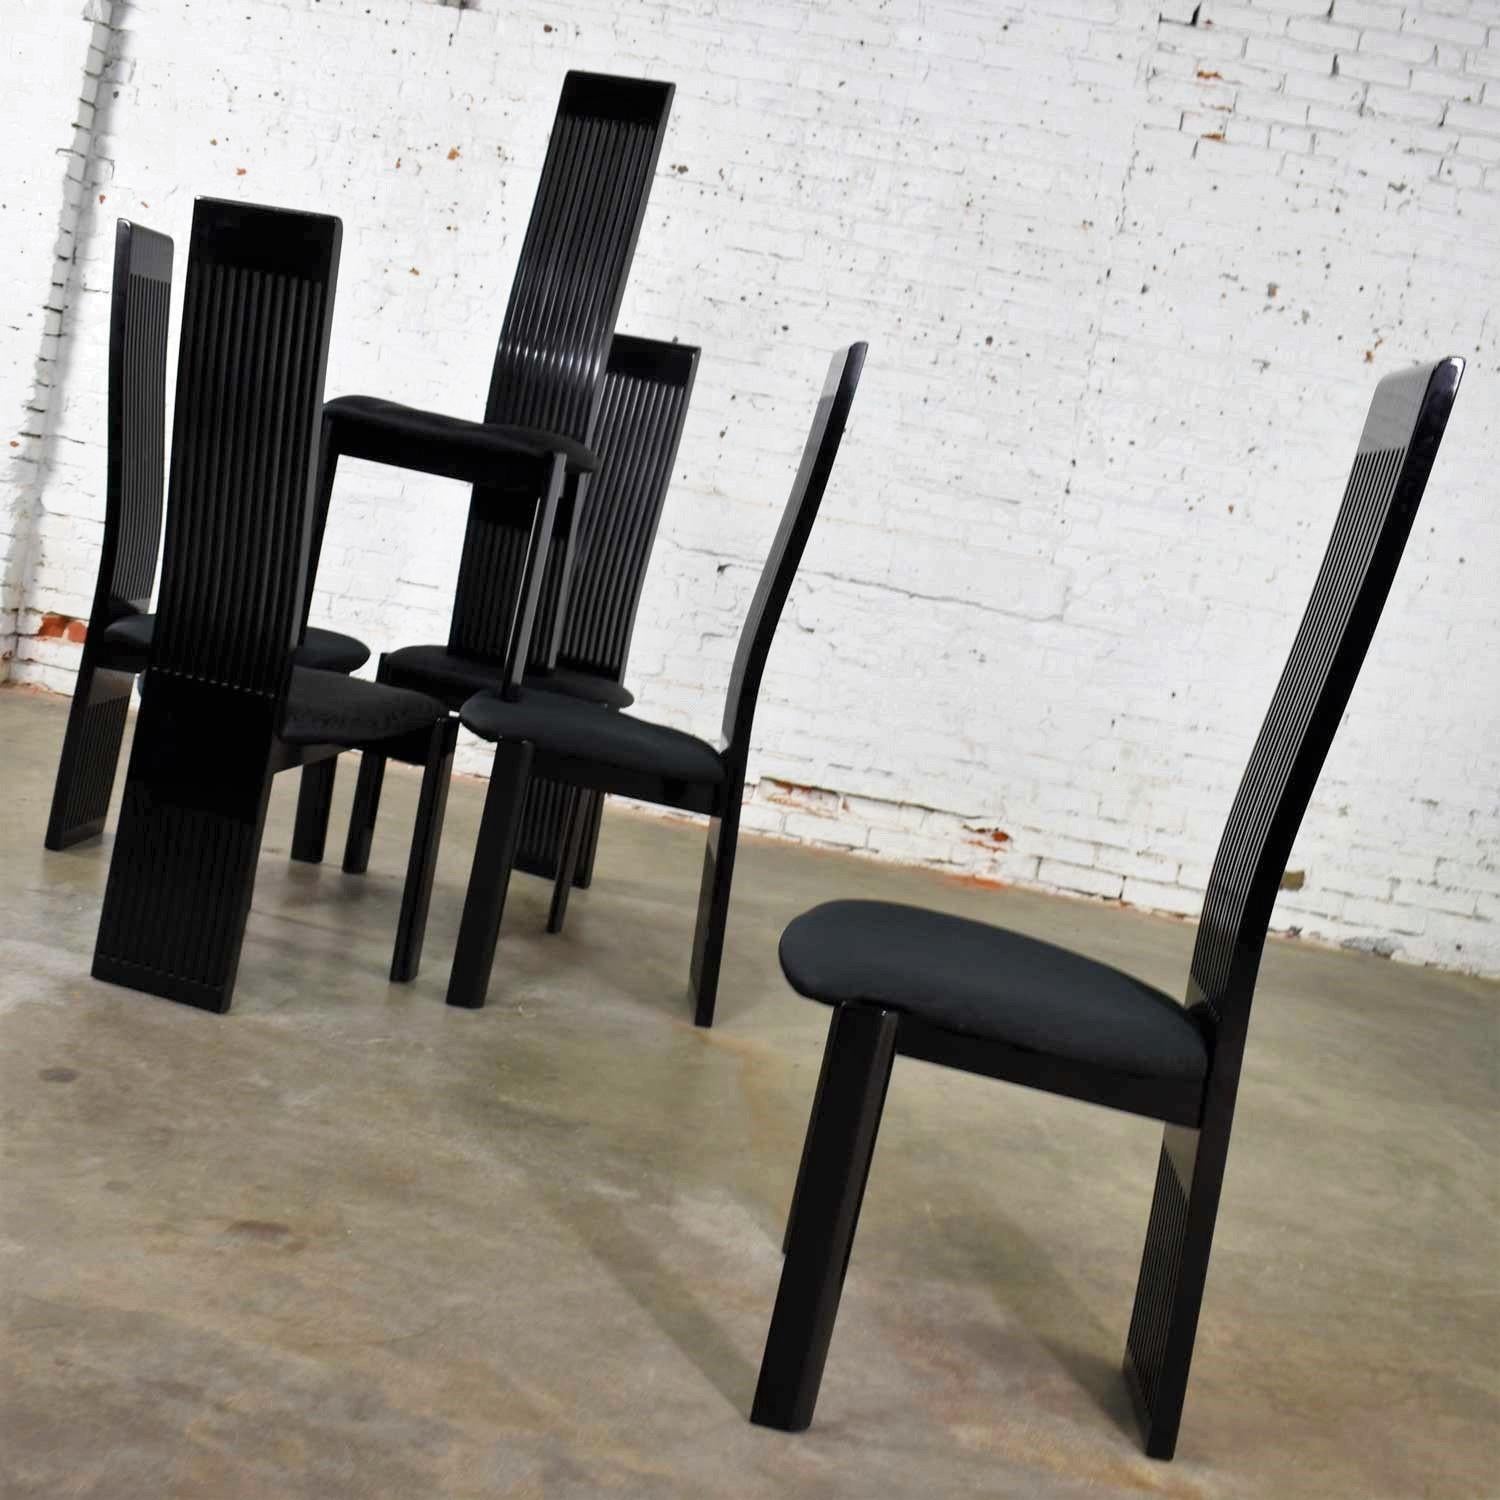 Six Tripod Postmodern Black Lacquer Dining Chairs by Pietro Costantini Made in 2